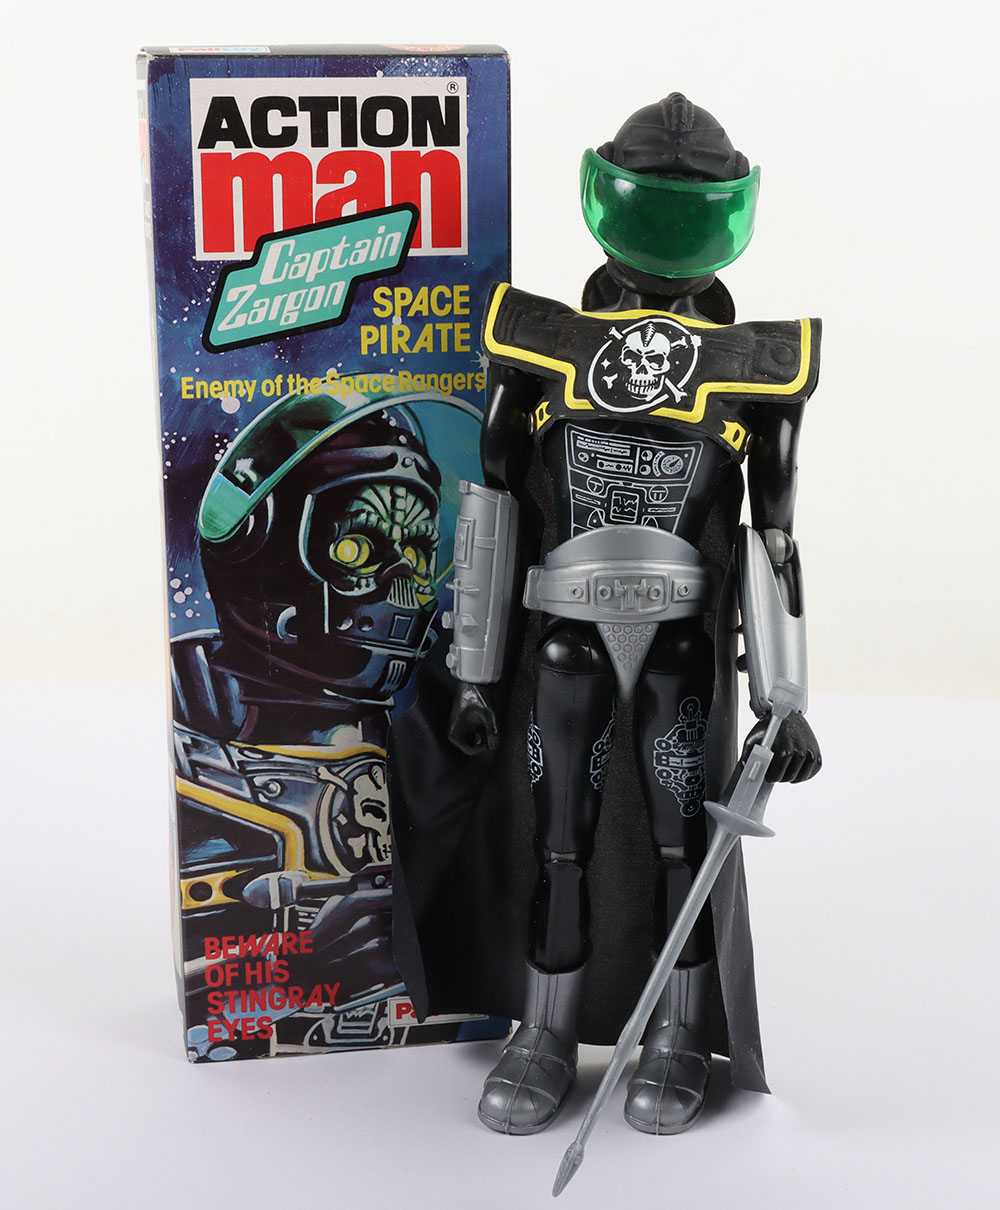 Captain Zargon Space Pirate Vintage Action Man by Palitoy - Image 5 of 9